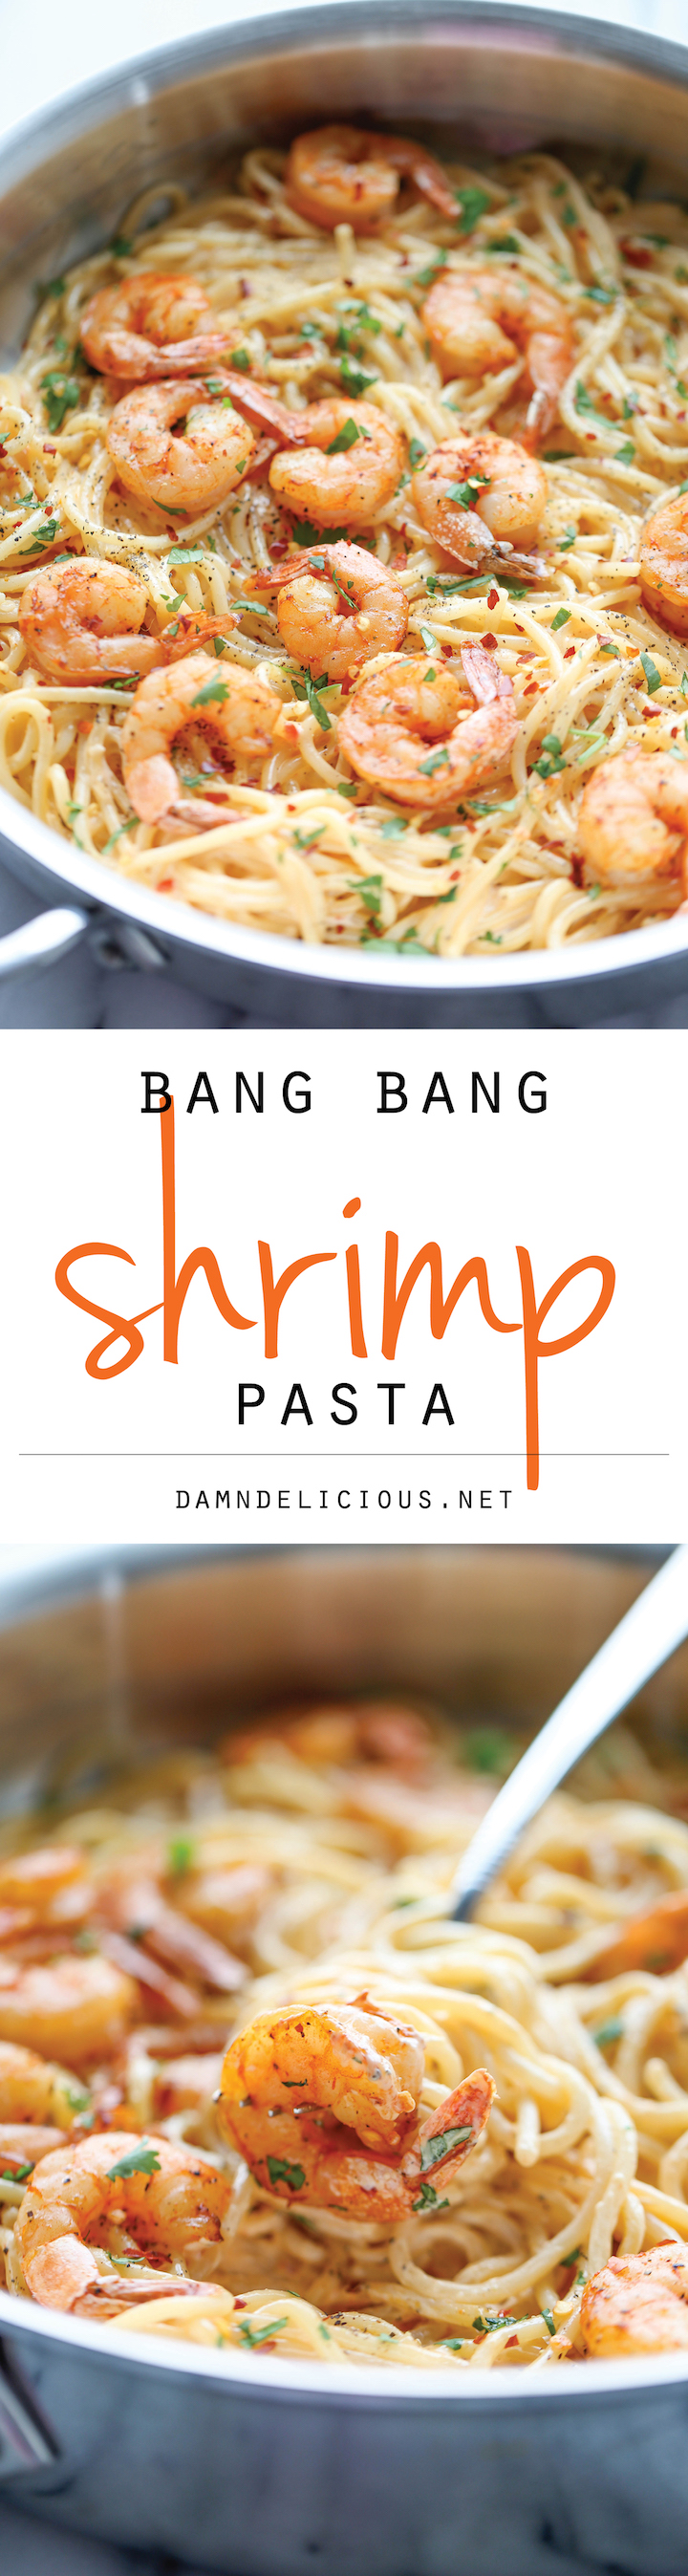 Bang Bang Shrimp Pasta - The favorite bang bang shrimp is turned into the creamiest, easiest pasta dishes of all!